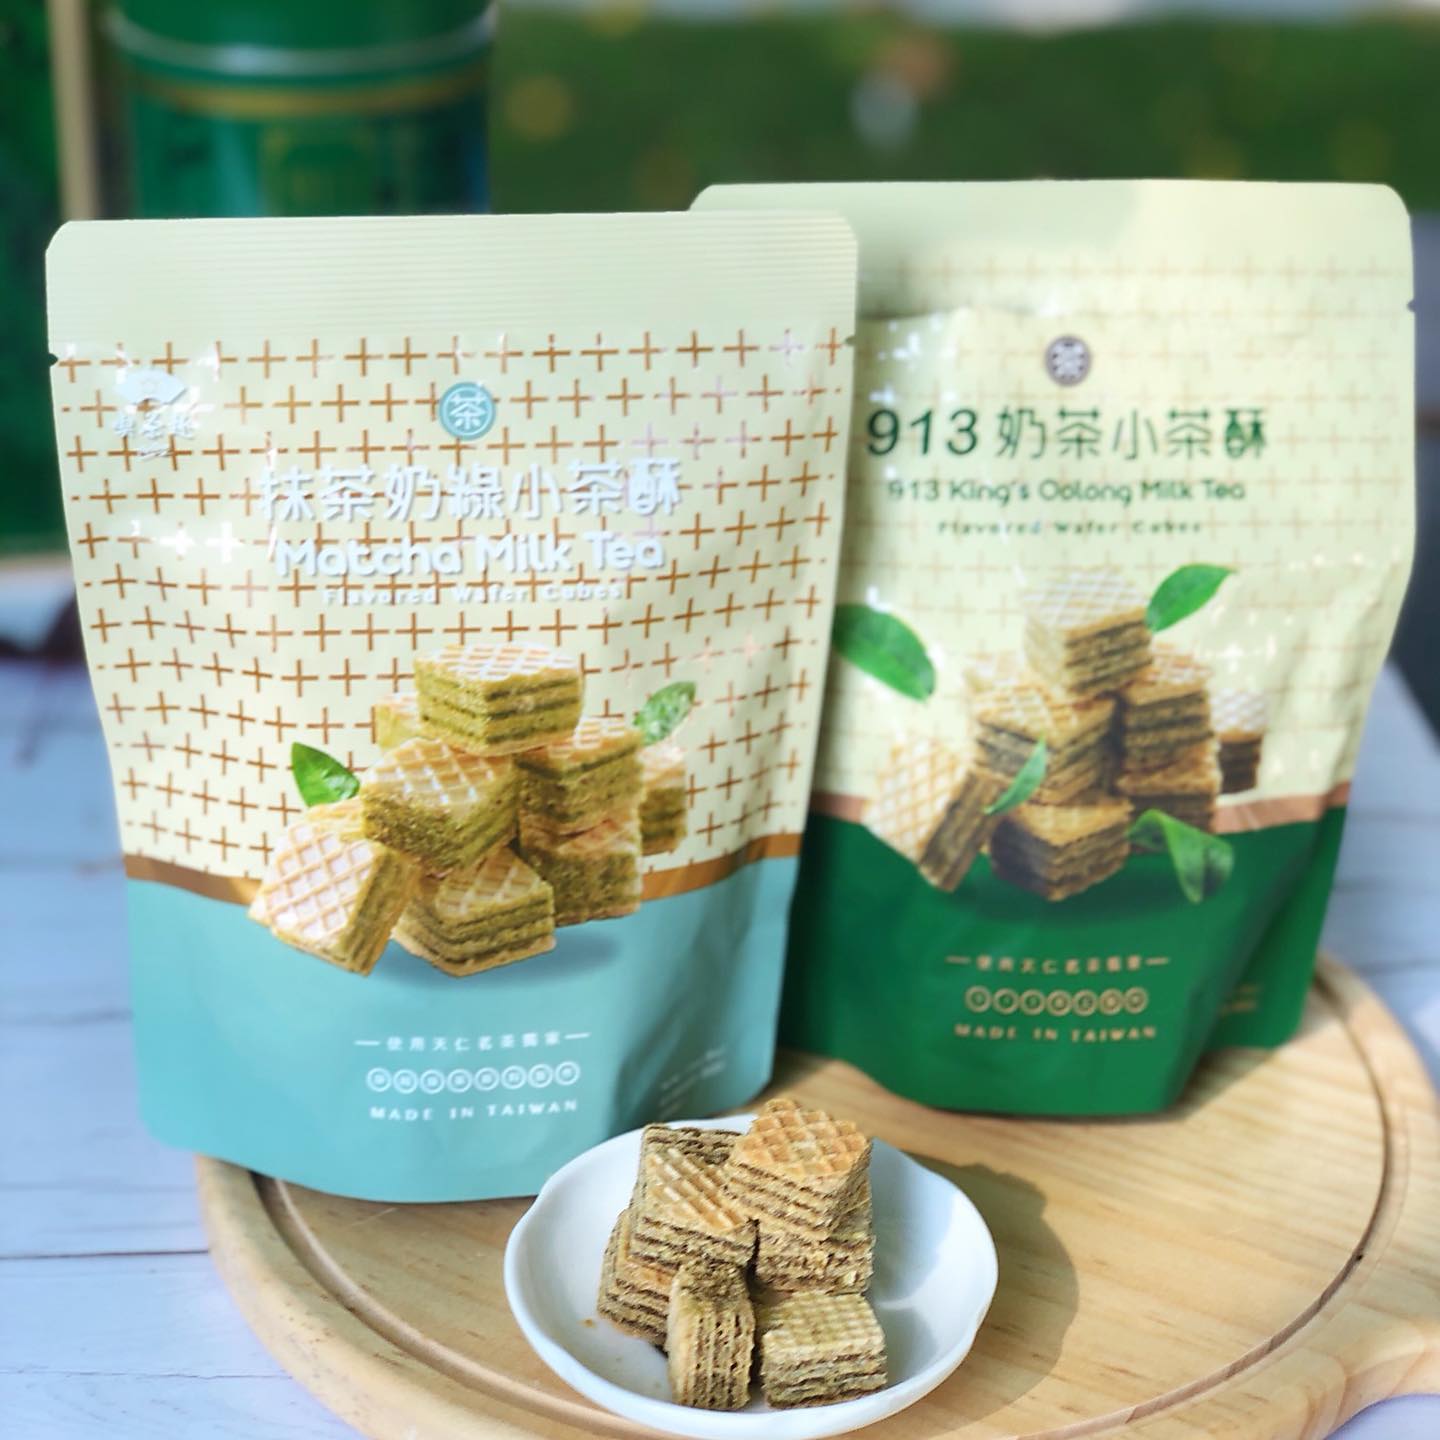 《Exclusive Debut 📣Matche Milk Tea Flavored Wafer Cubes》👑Combining the rich and mellow Matcha milk tea filling + crunchy wafers to create the luscious taste in a bite size cube.  ✔️Bite size cubes, simply delicious and convenient